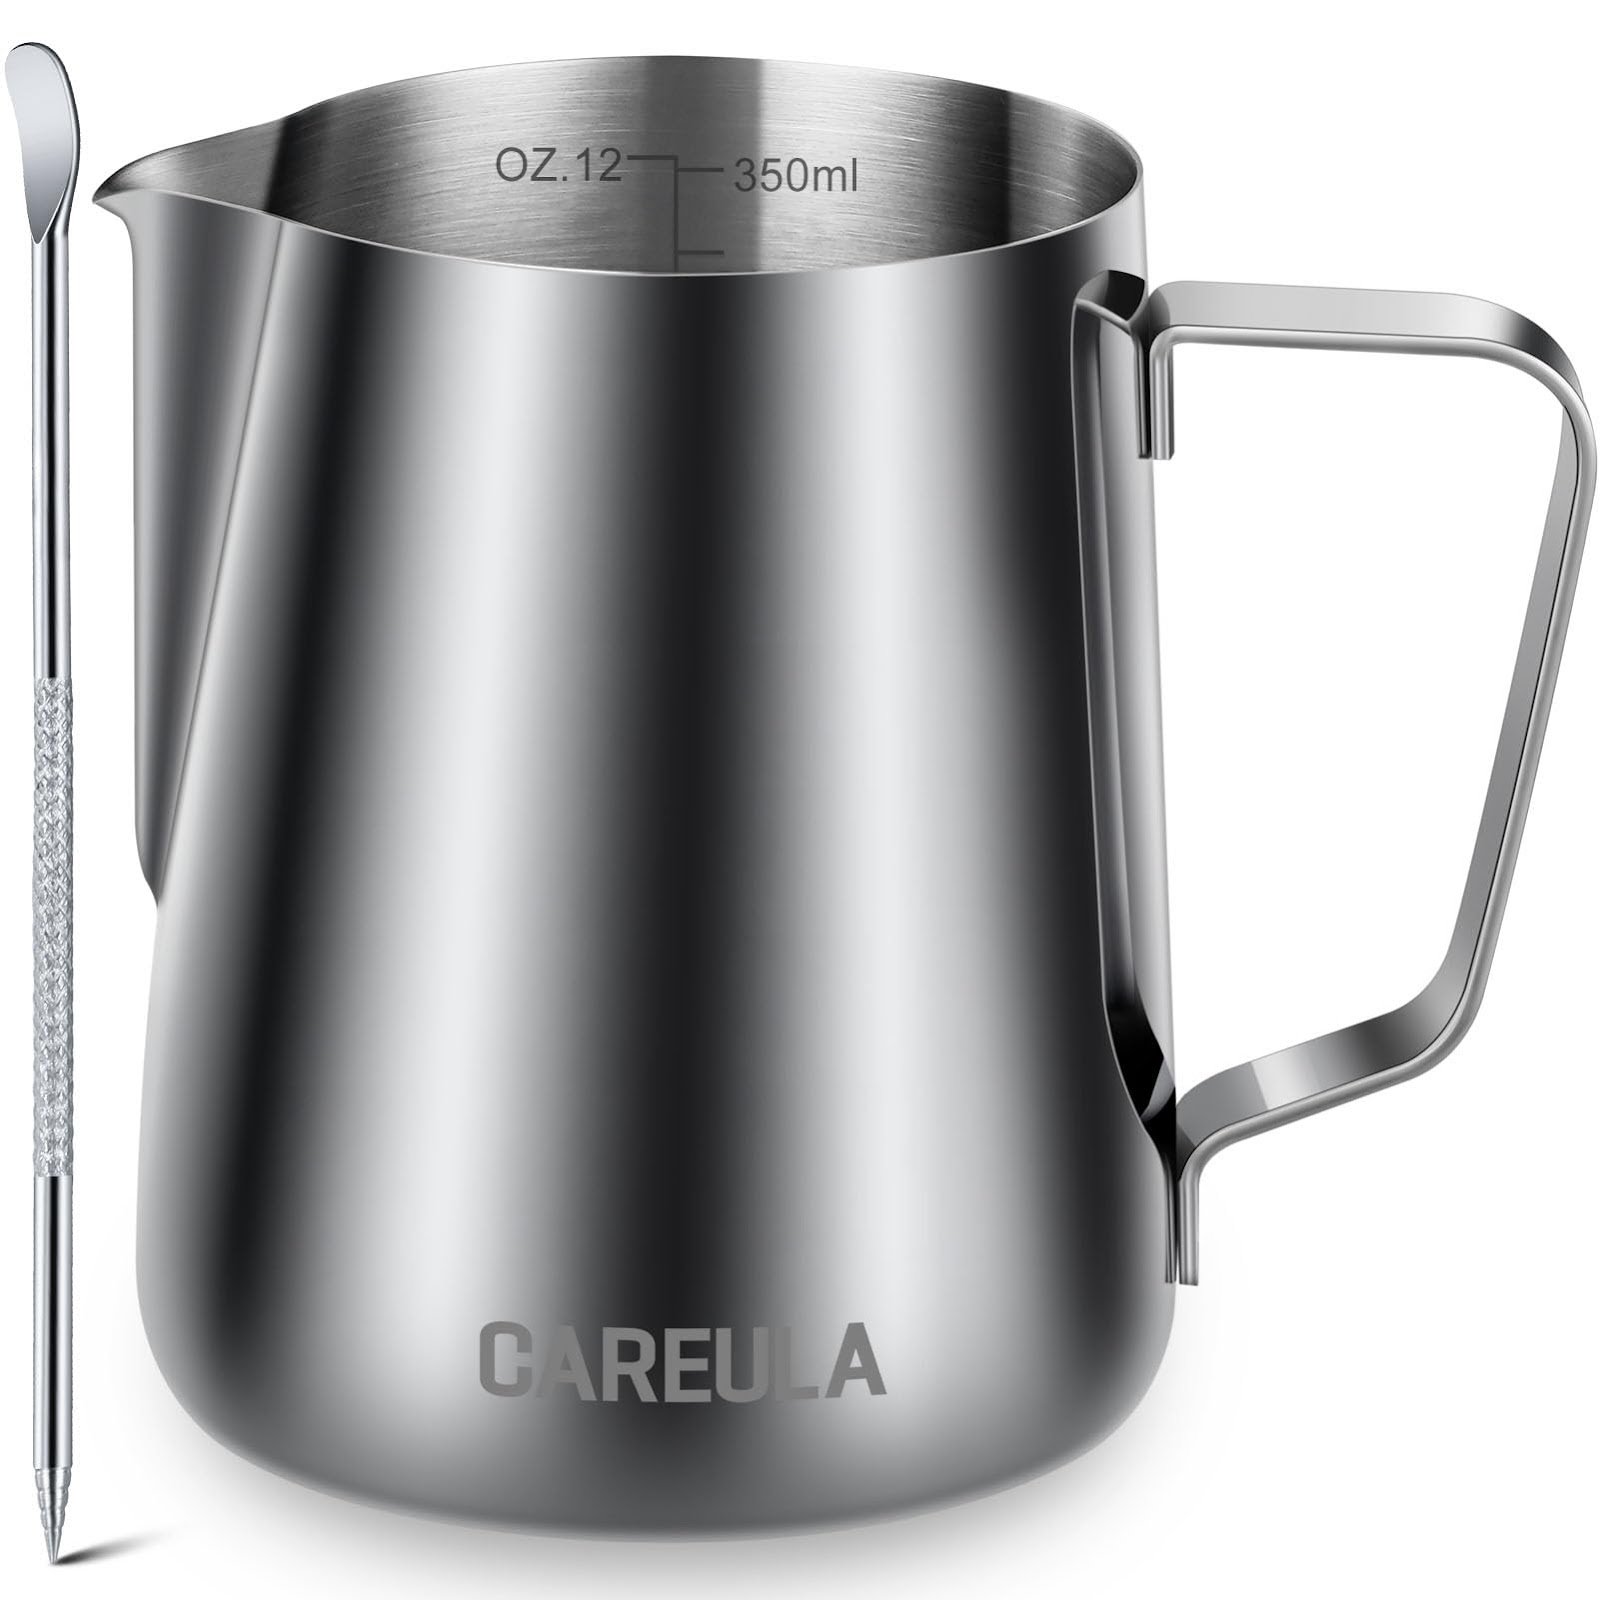 Careula Milk Frothing Pitcher